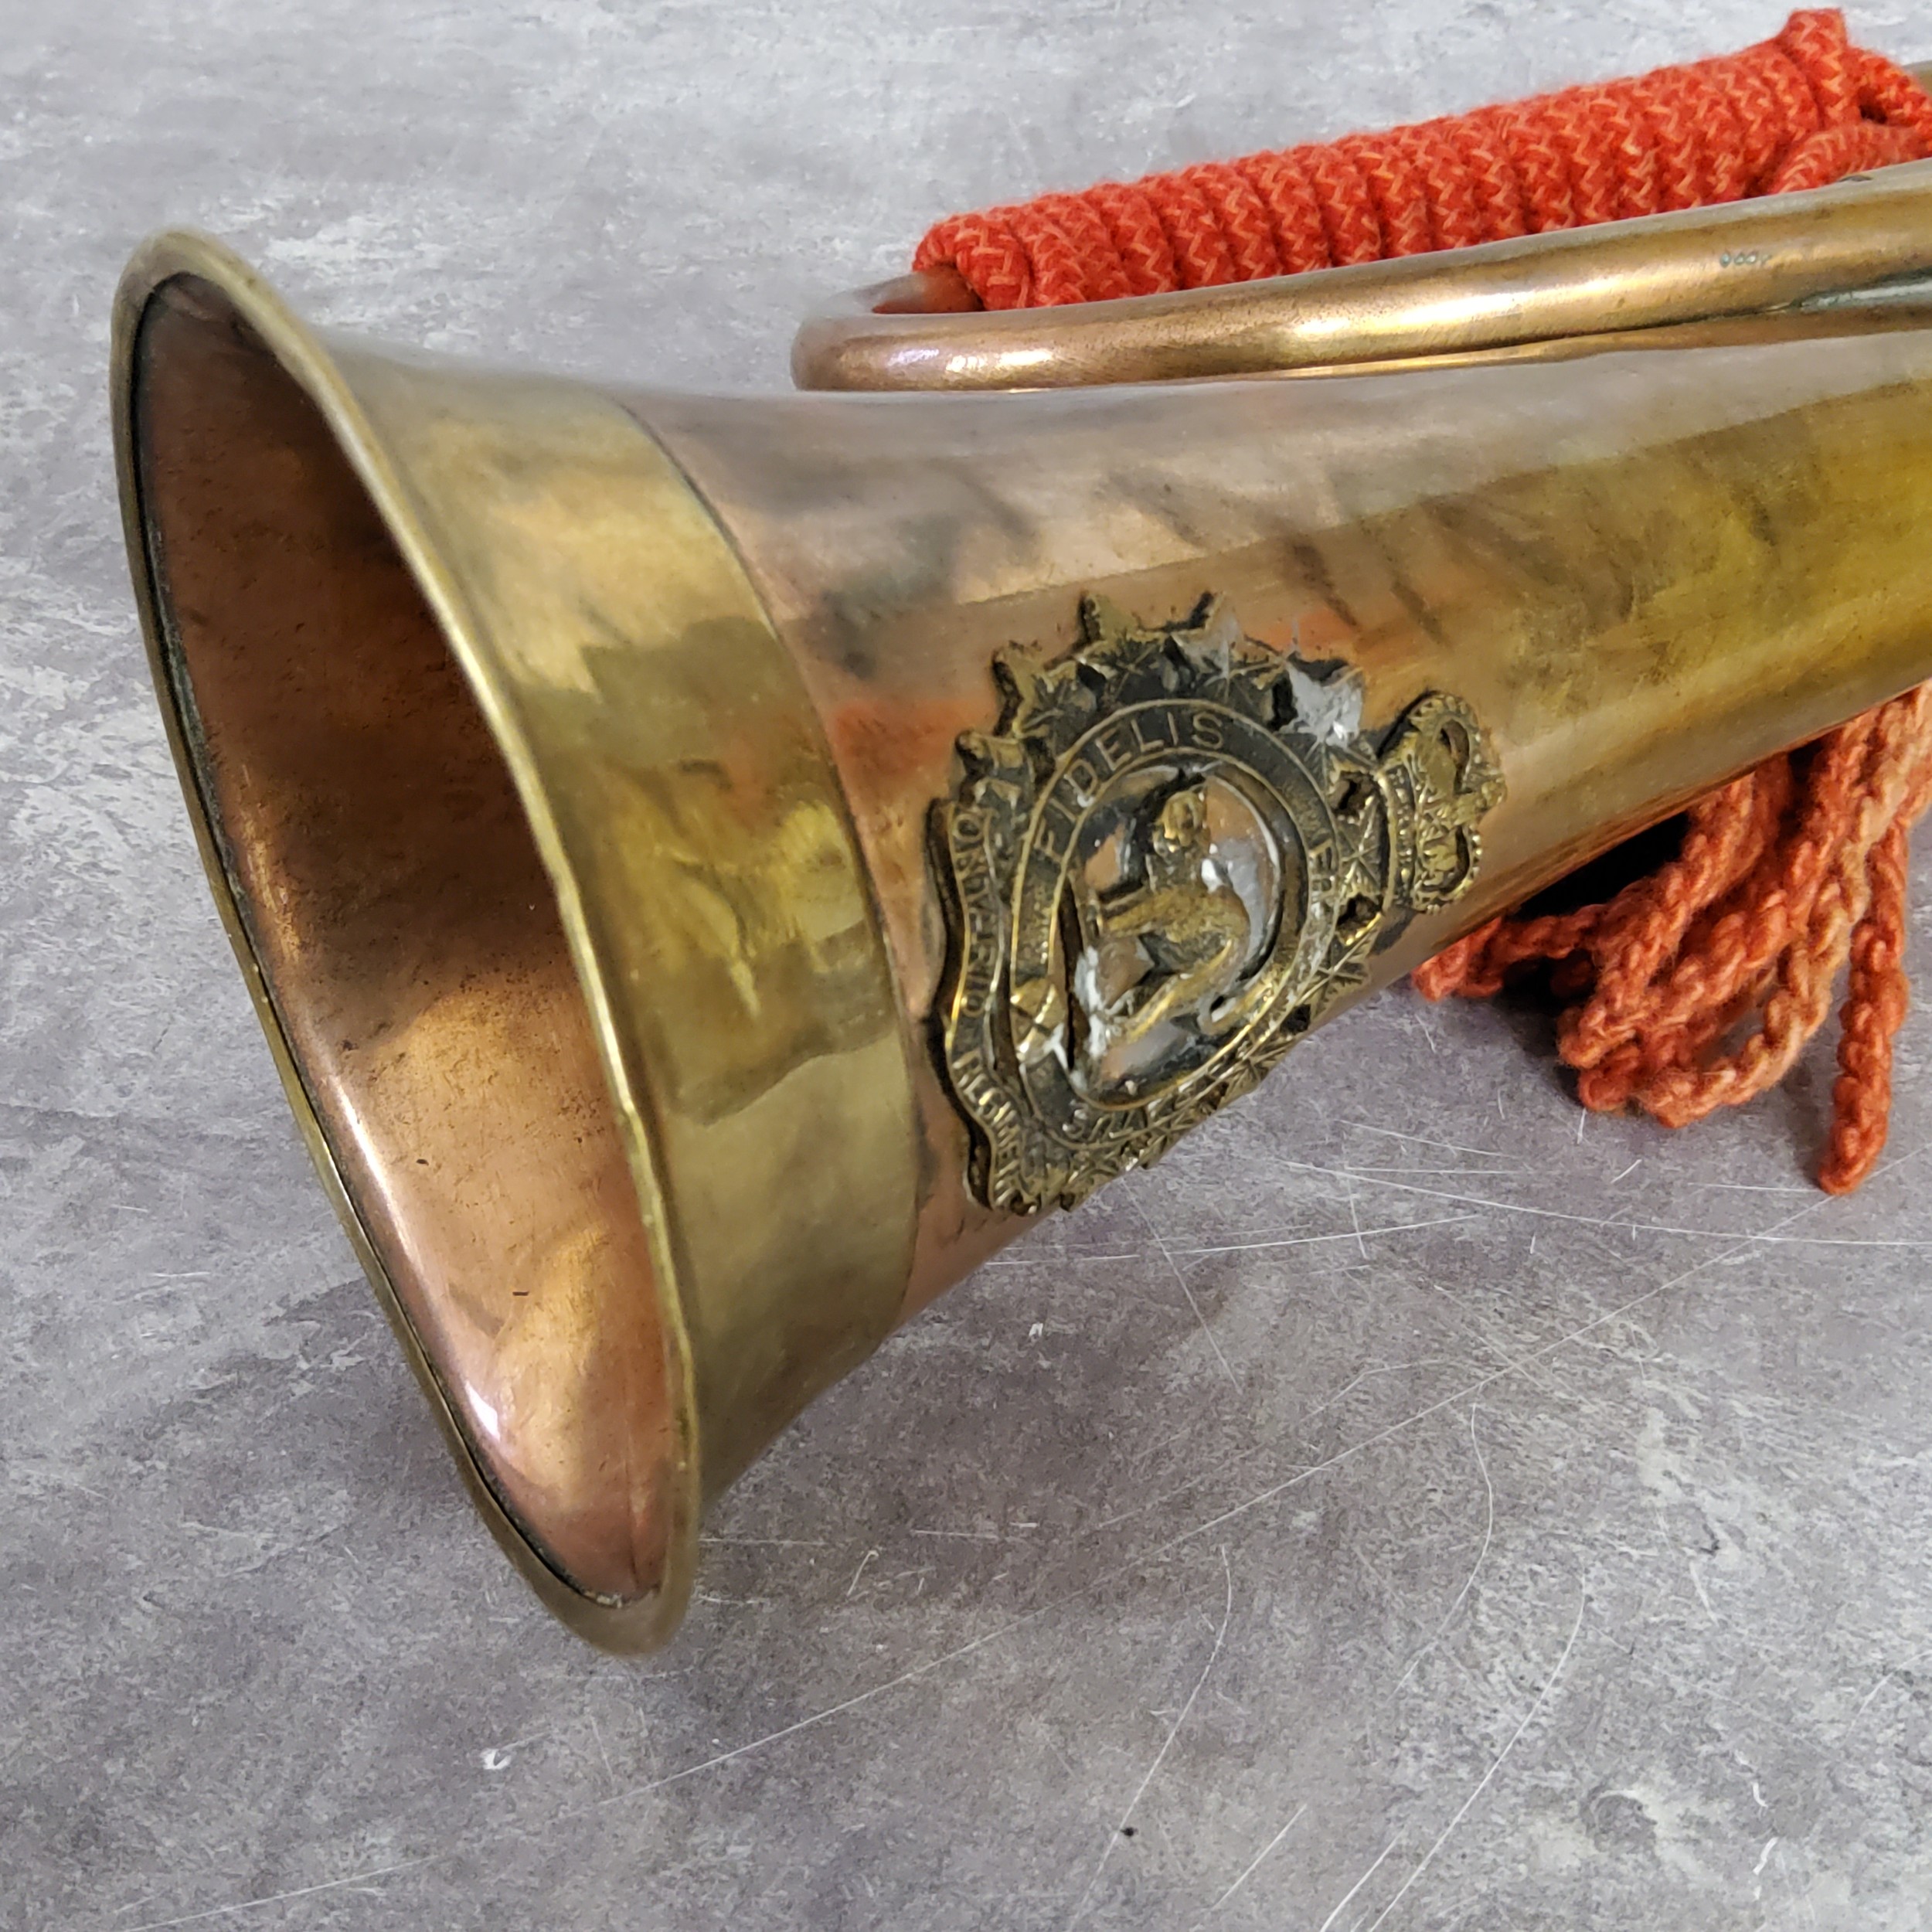 Militaria - A WWI copper and brass bugle with Ontario Regiment badge of a cat with arched back - Image 2 of 4